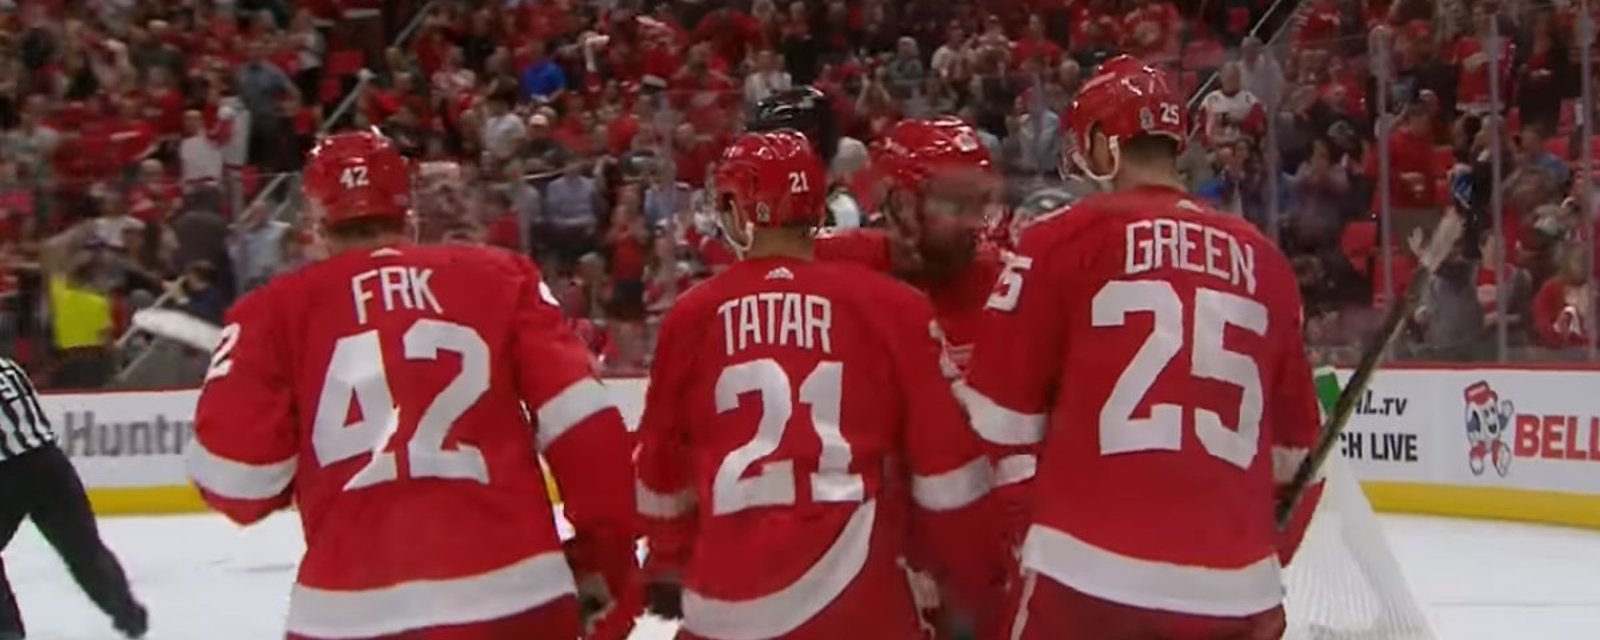 Must see: Mantha scores first ever goal at new Little Caesars Arena!